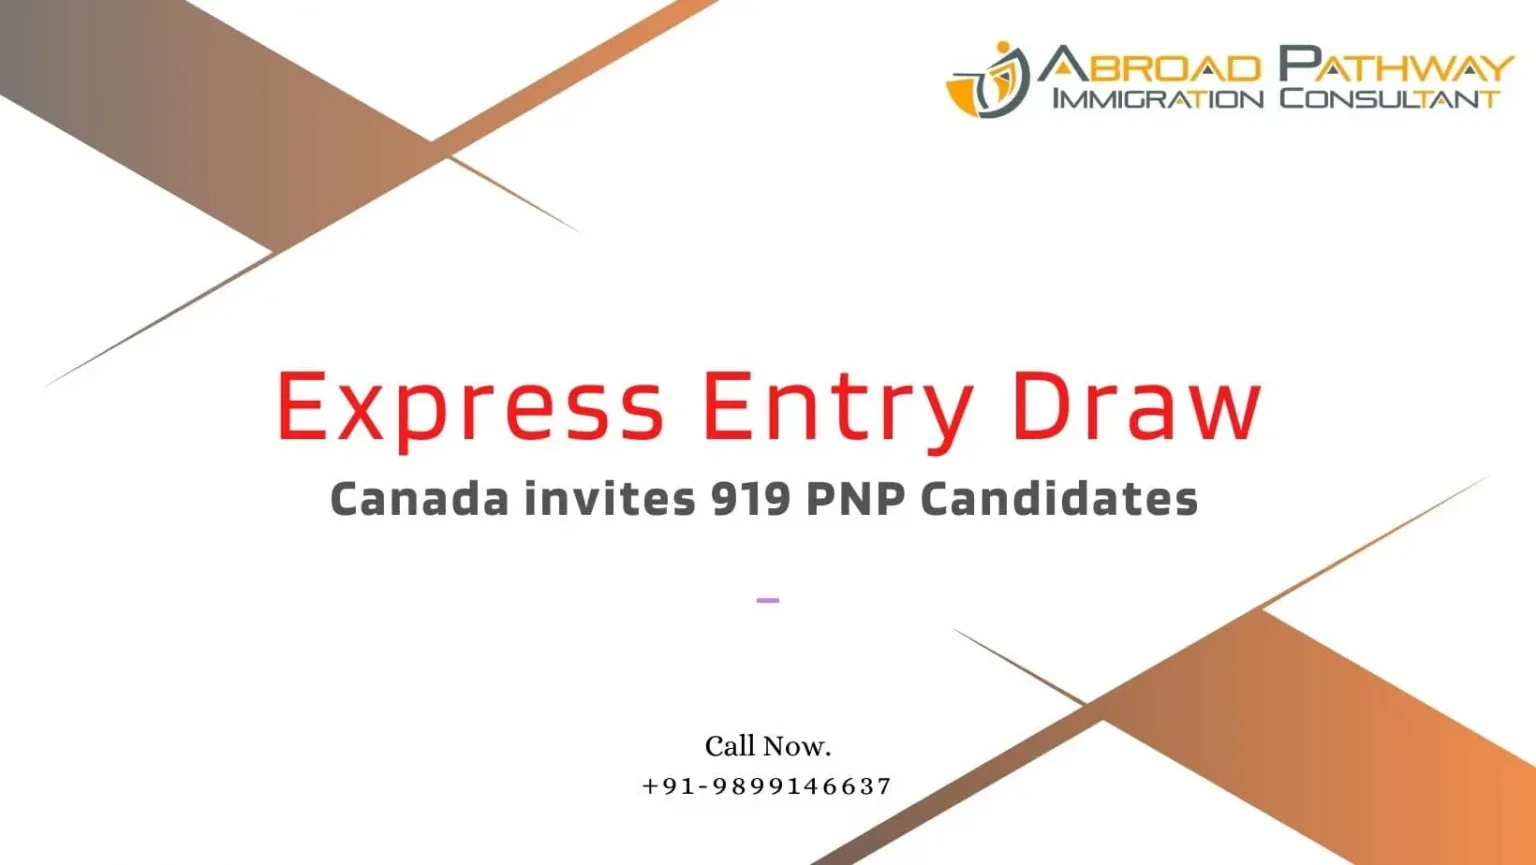 Canada invites 919 PNP candidates Recent Express Entry Draw